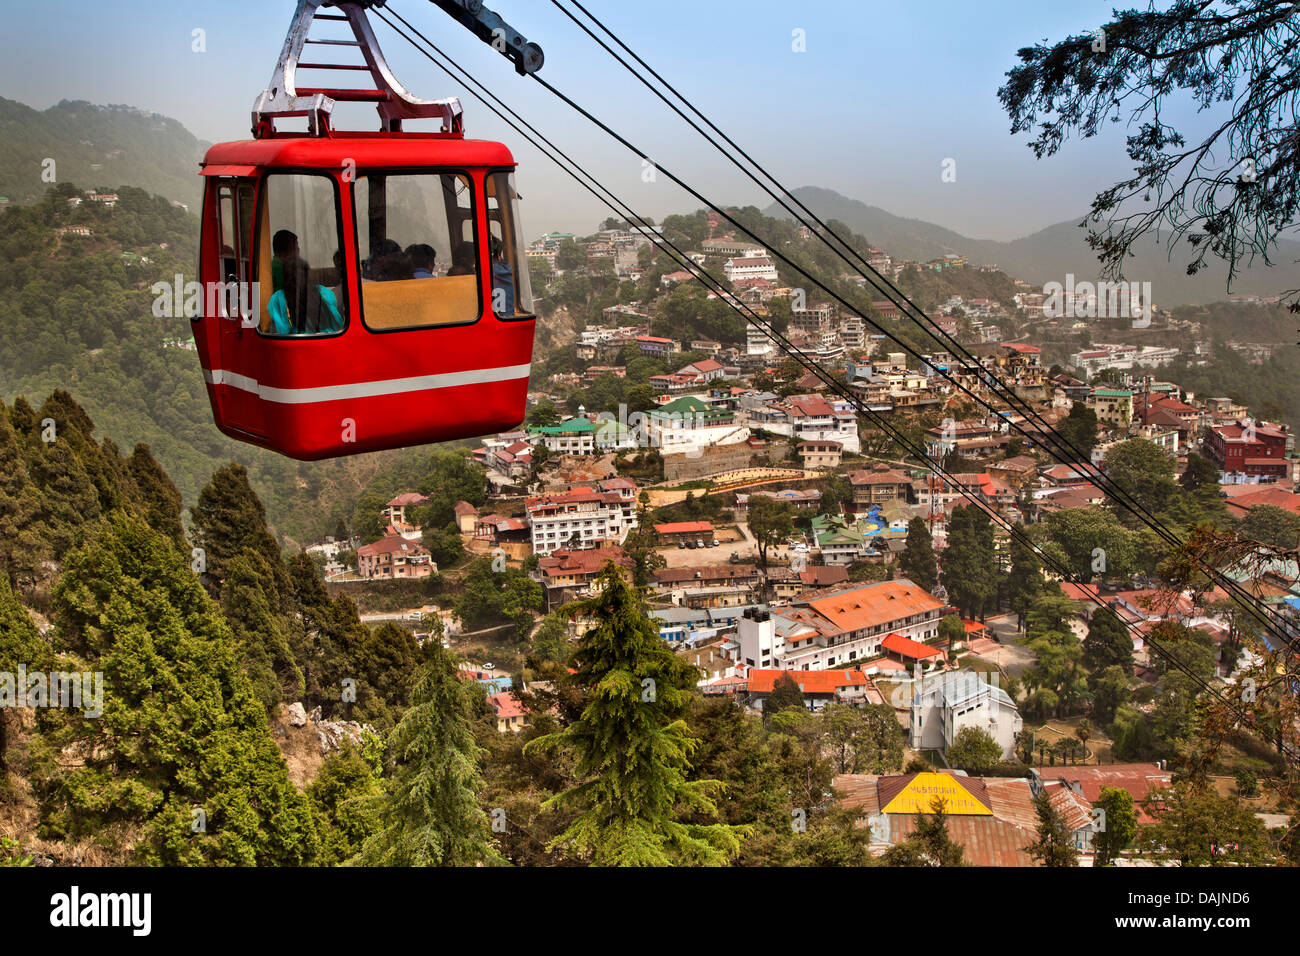 Overhead Cable Car houses in the background, Gun Hill, Mussoorie, Uttarakhand, India Stock Photo